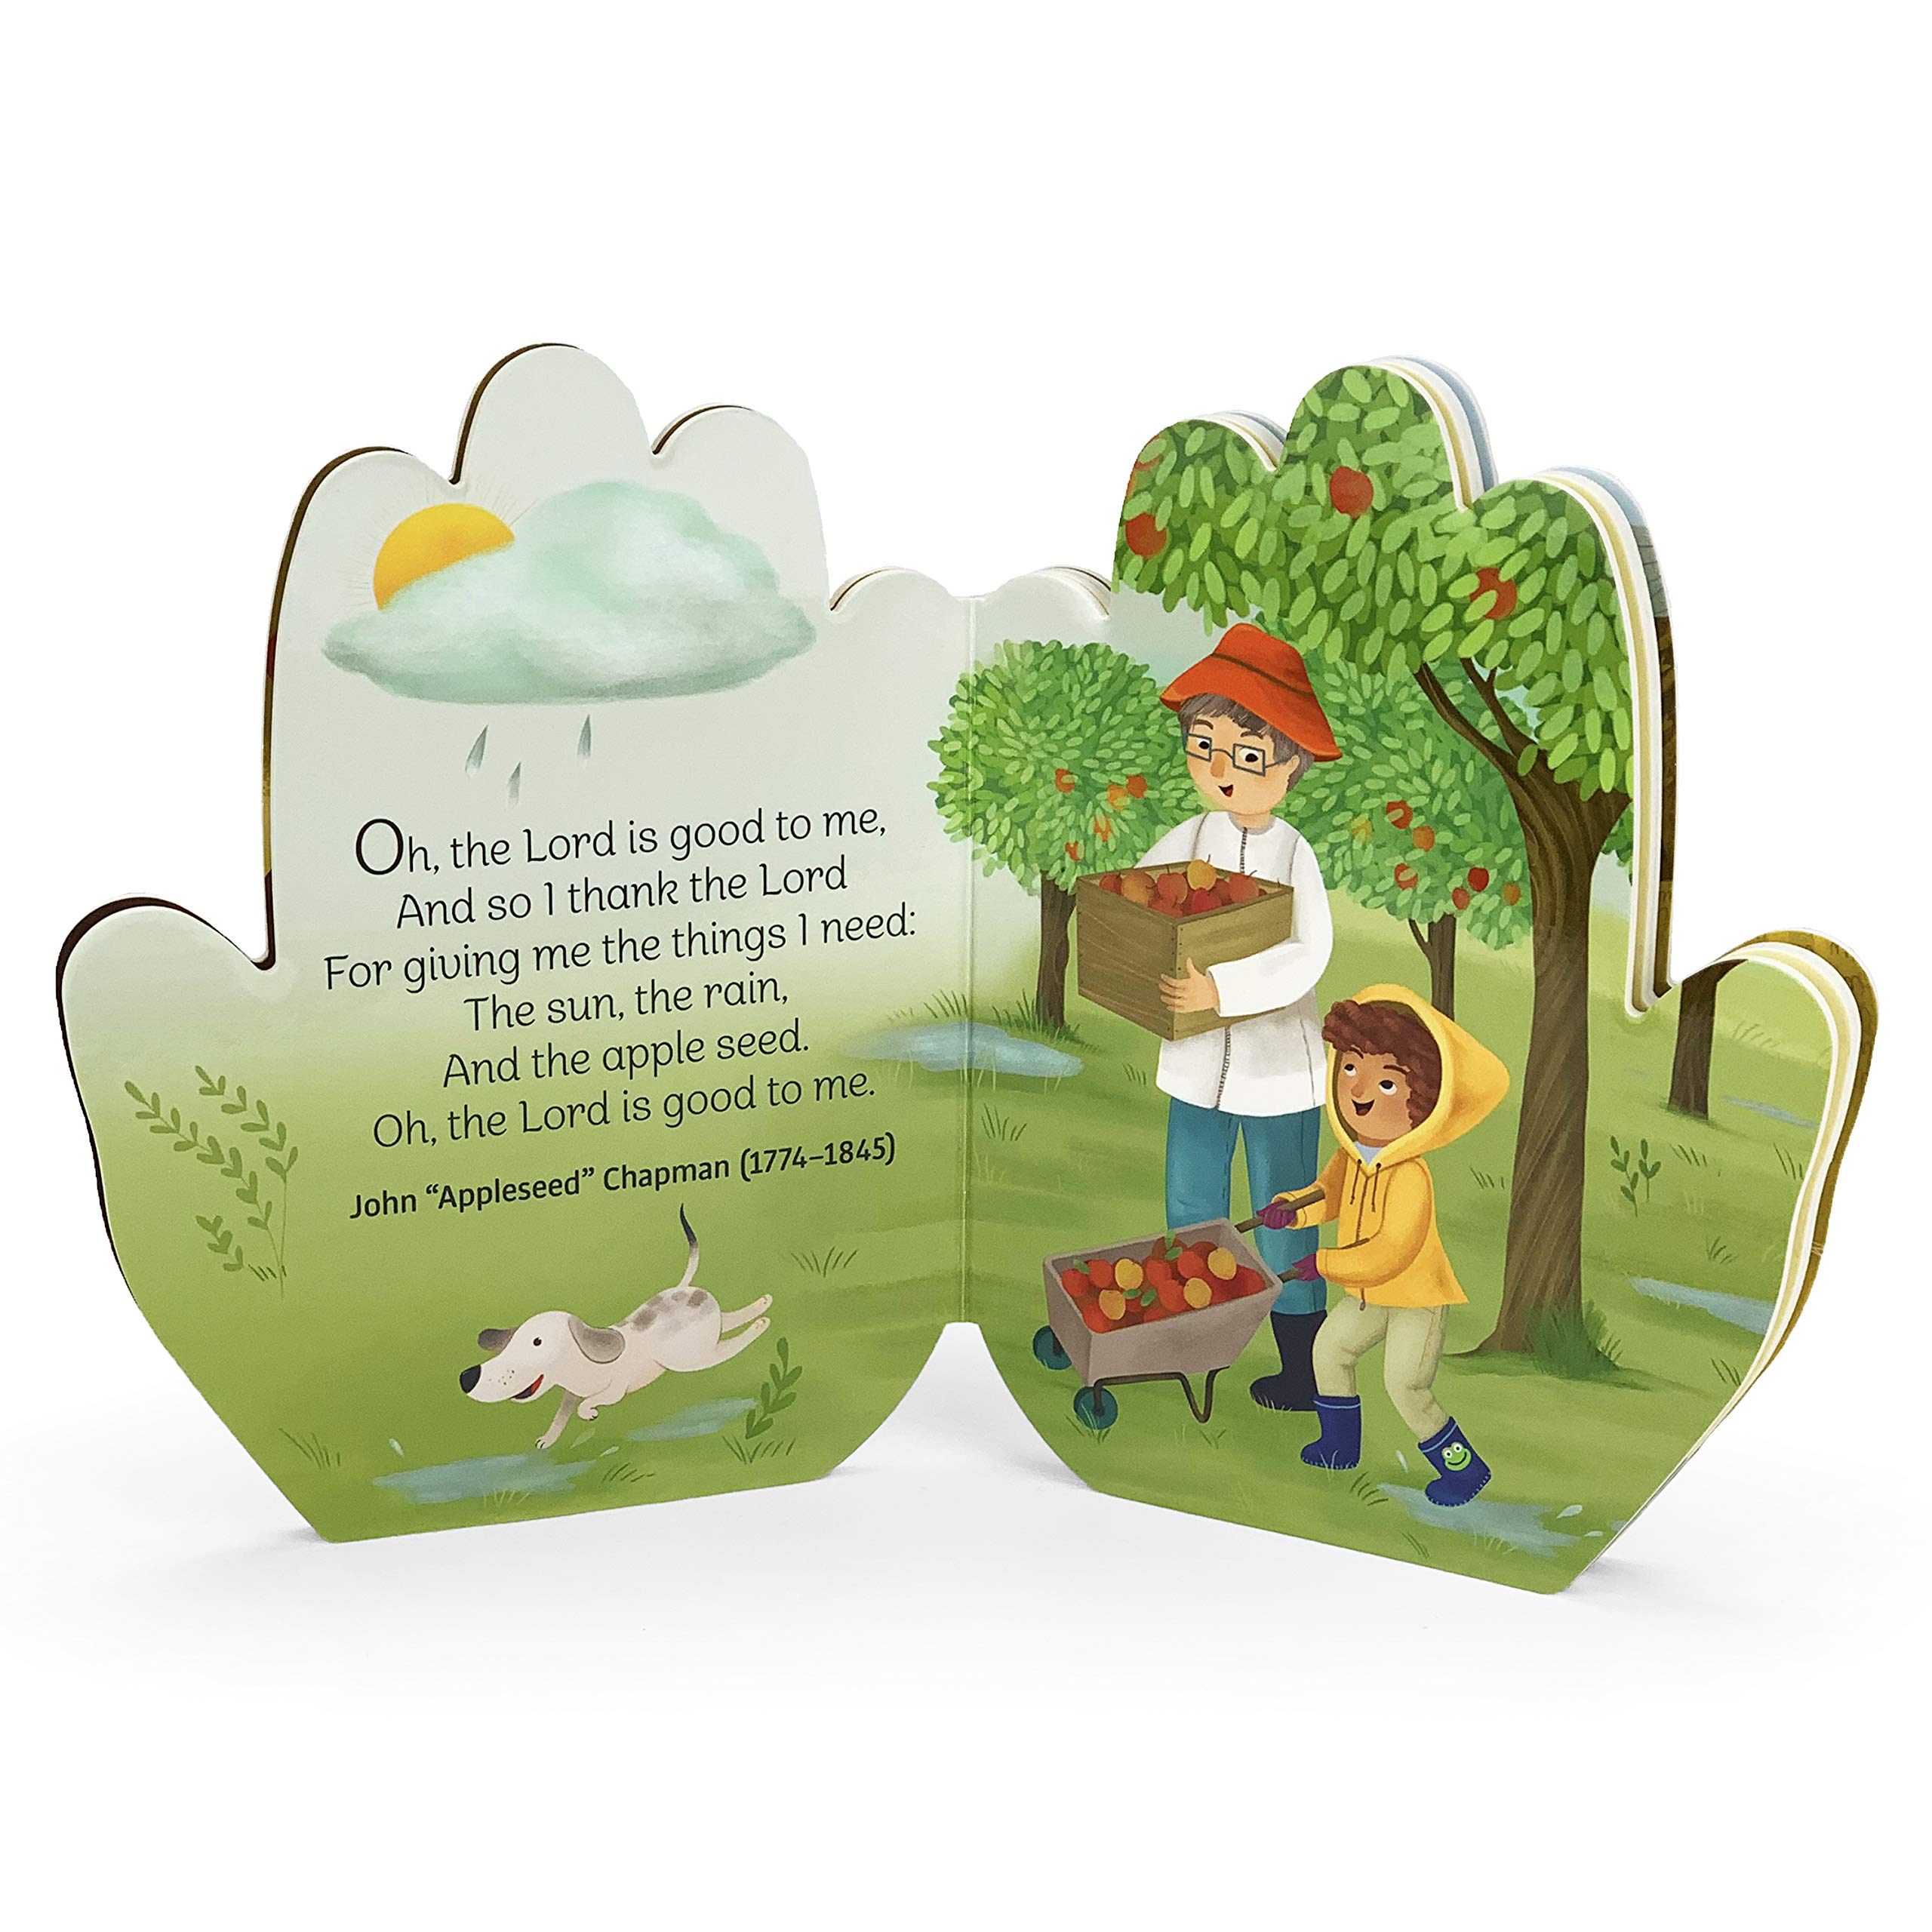 God is Good Praying Hands Board Book - Gift for Easter, Christmas, Communions, Birthdays, and more! Ages 1-5 (Little Sunbeams)